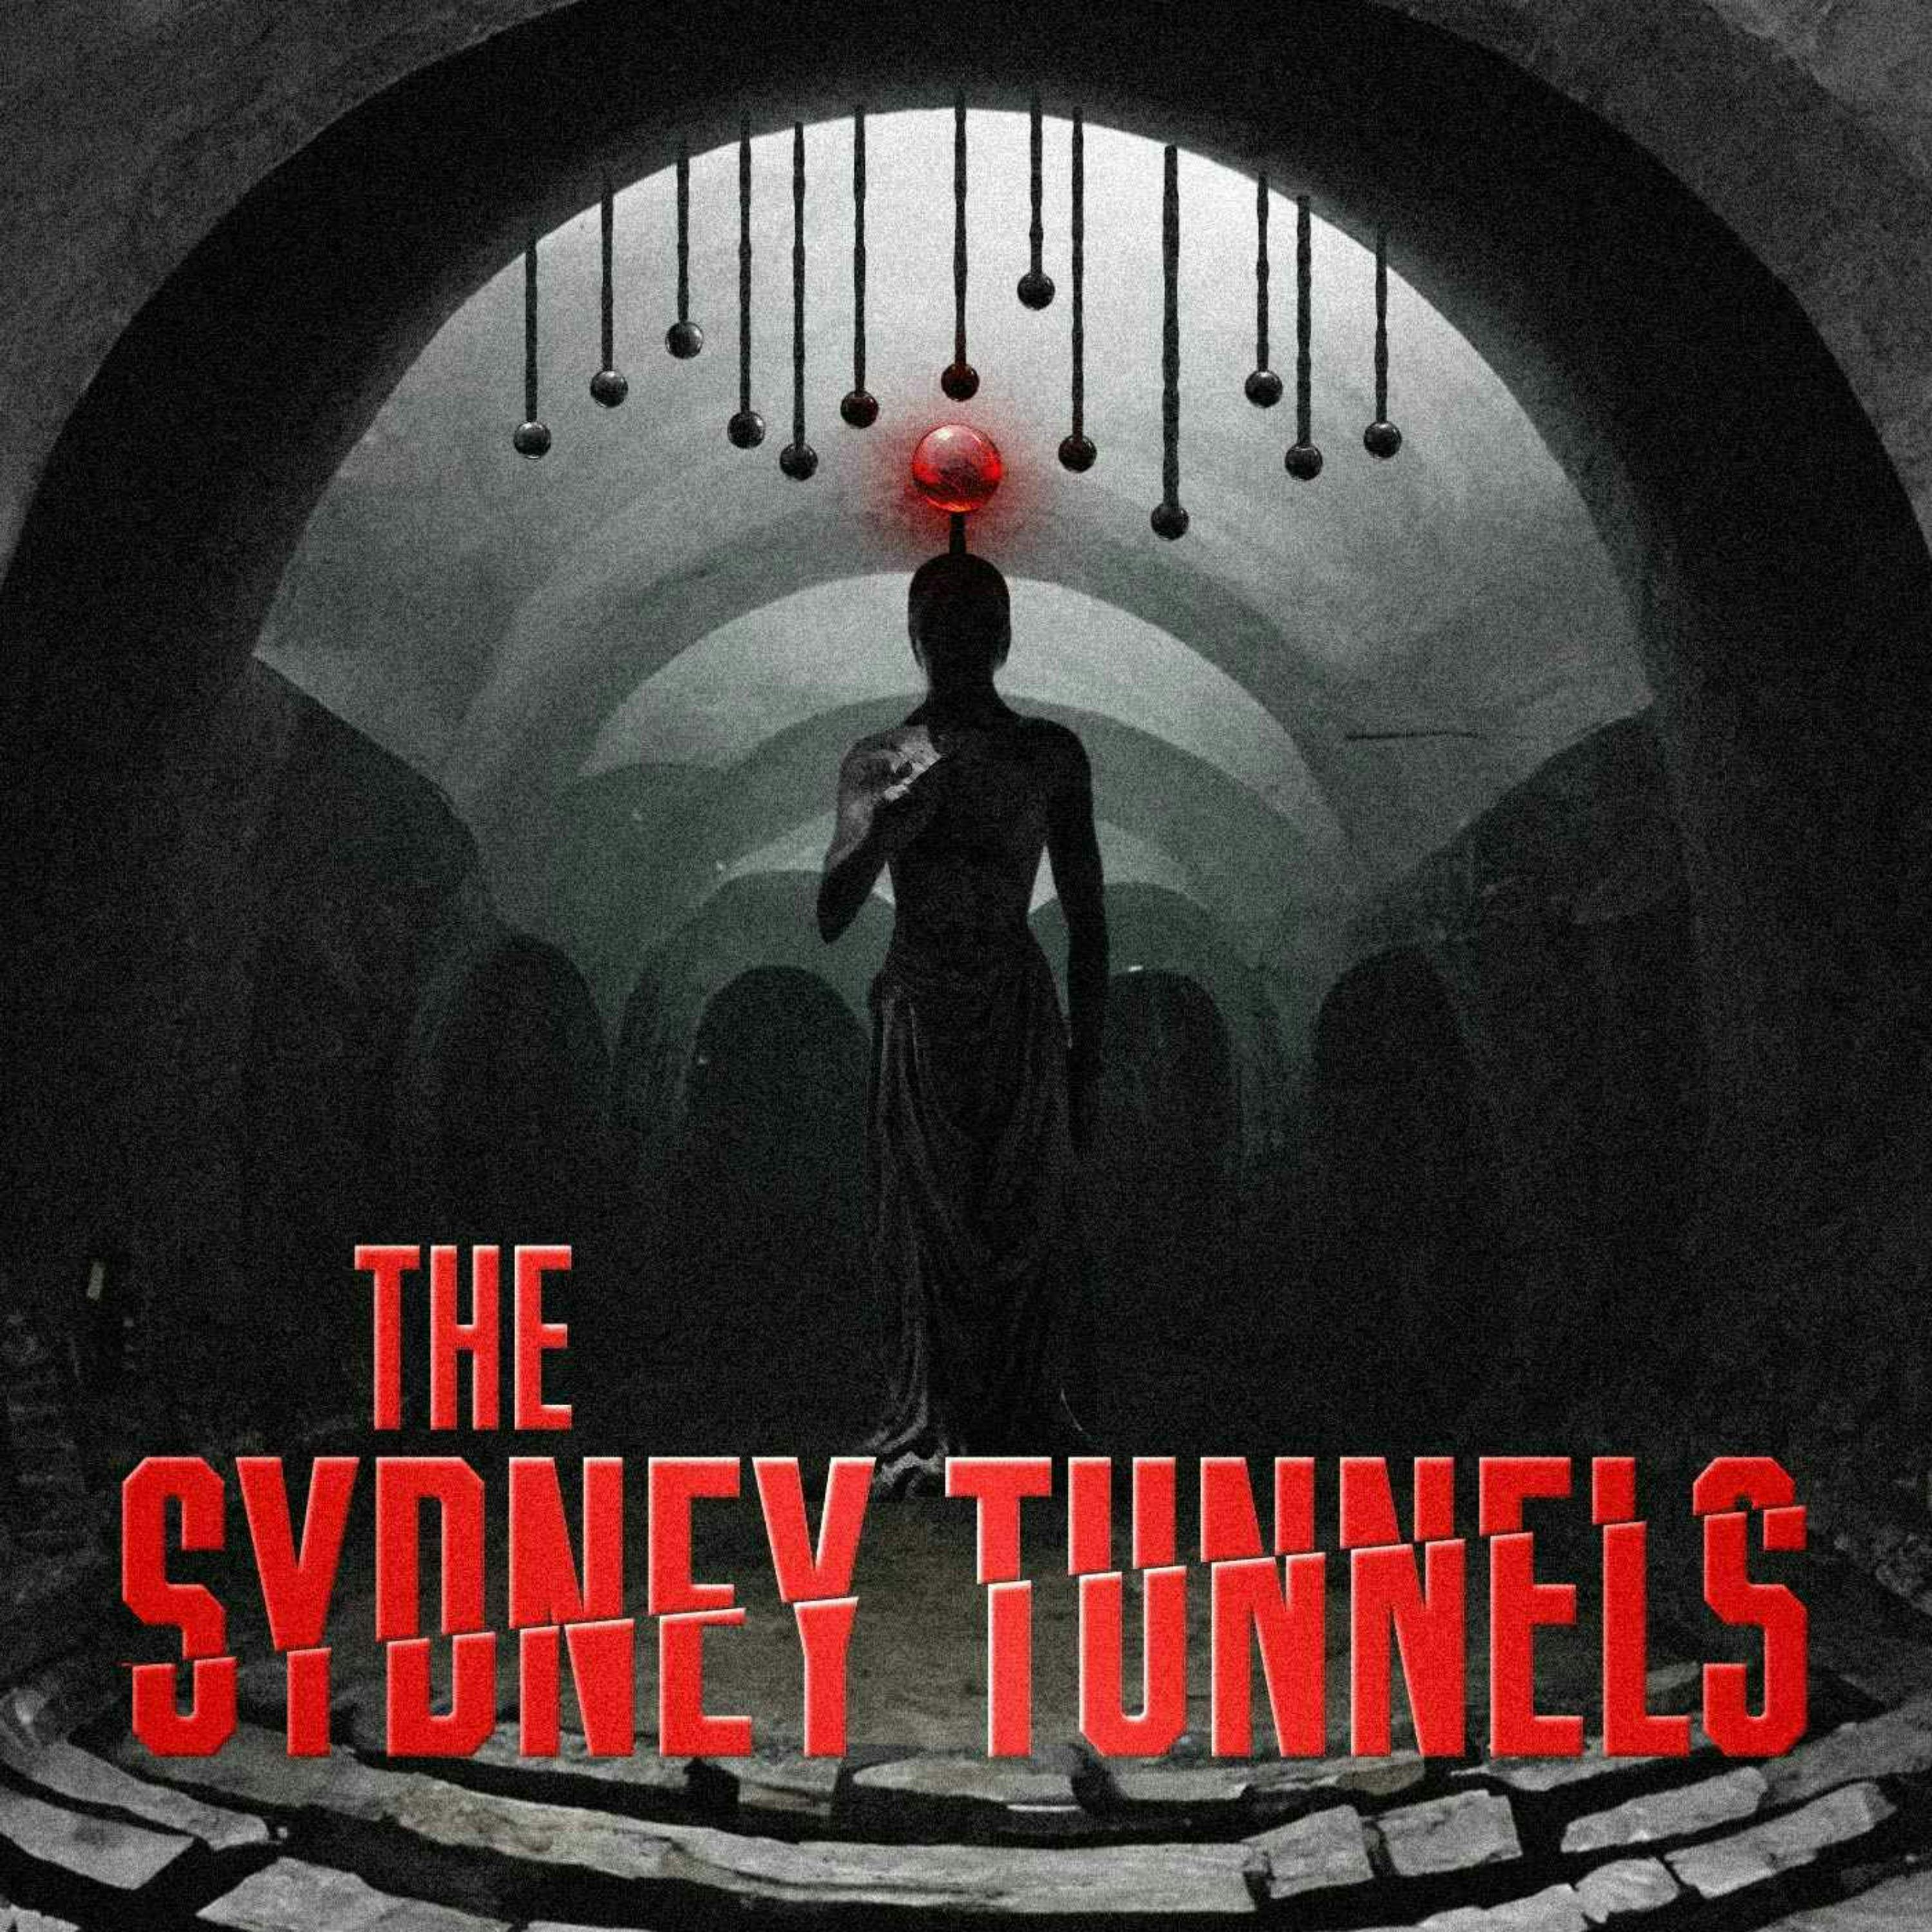 The Sydney Tunnels